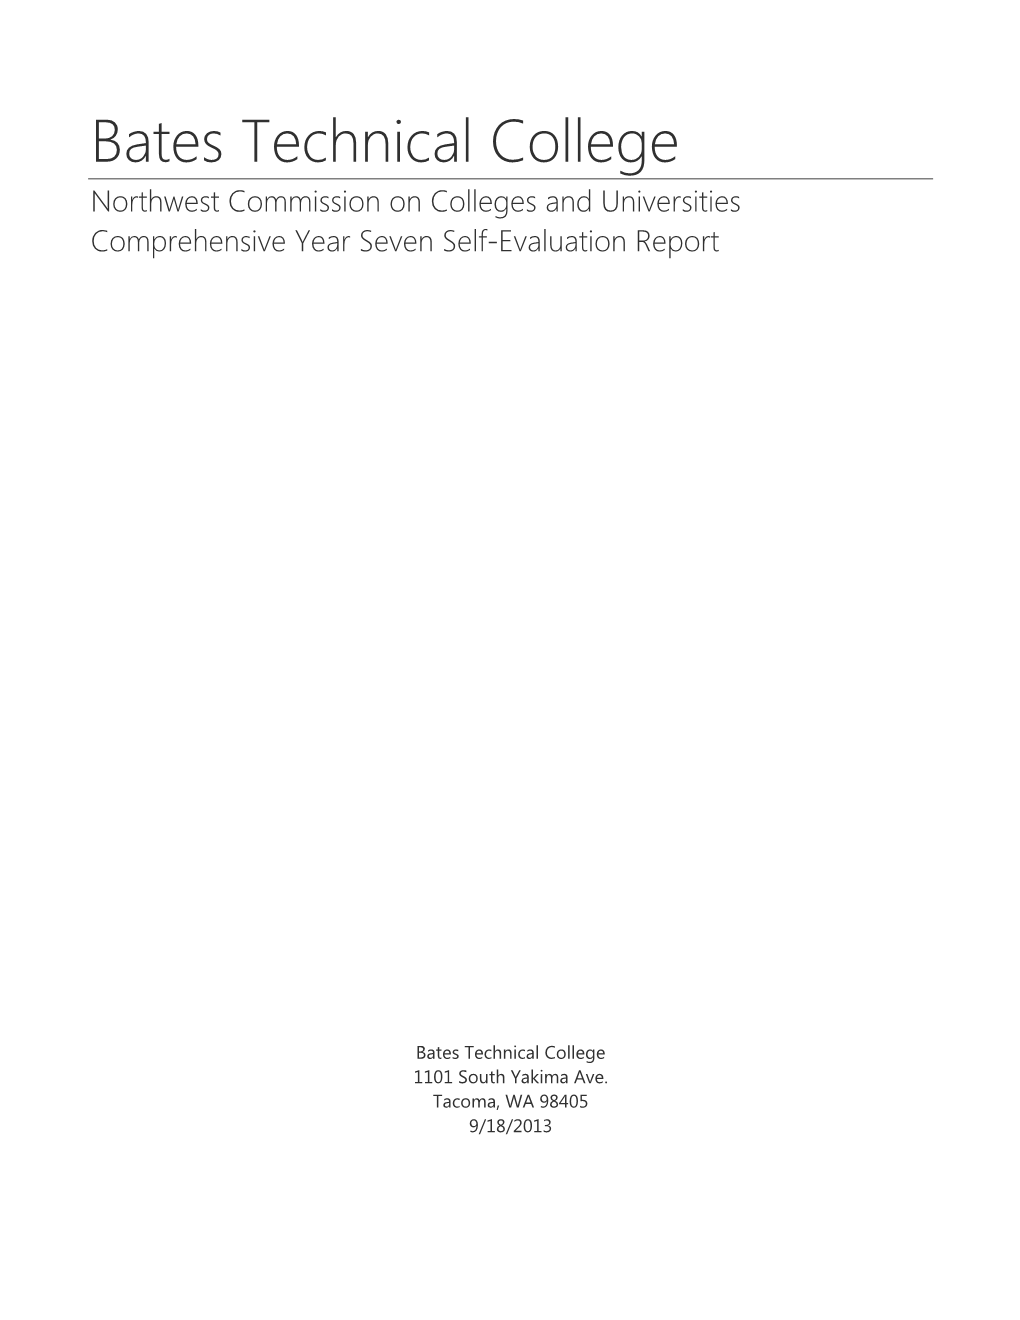 Bates Technical College Northwest Commission on Colleges and Universities Comprehensive Year Seven Self-Evaluation Report